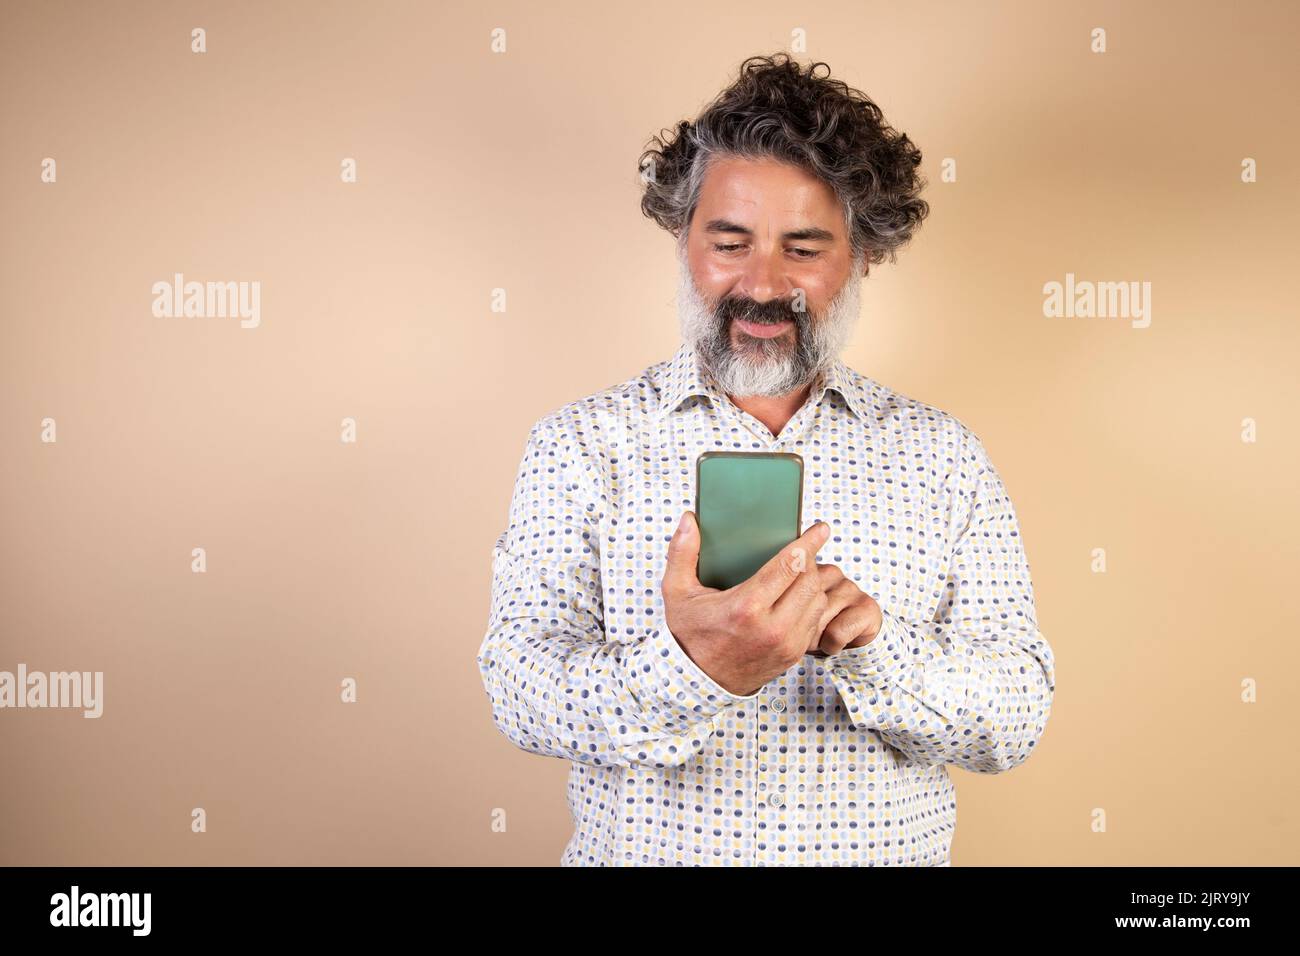 An average adult sends phone messages on a smart phone. Smiling modern man using smartphone on light wall. Happy man using app on mobile phone. Stock Photo